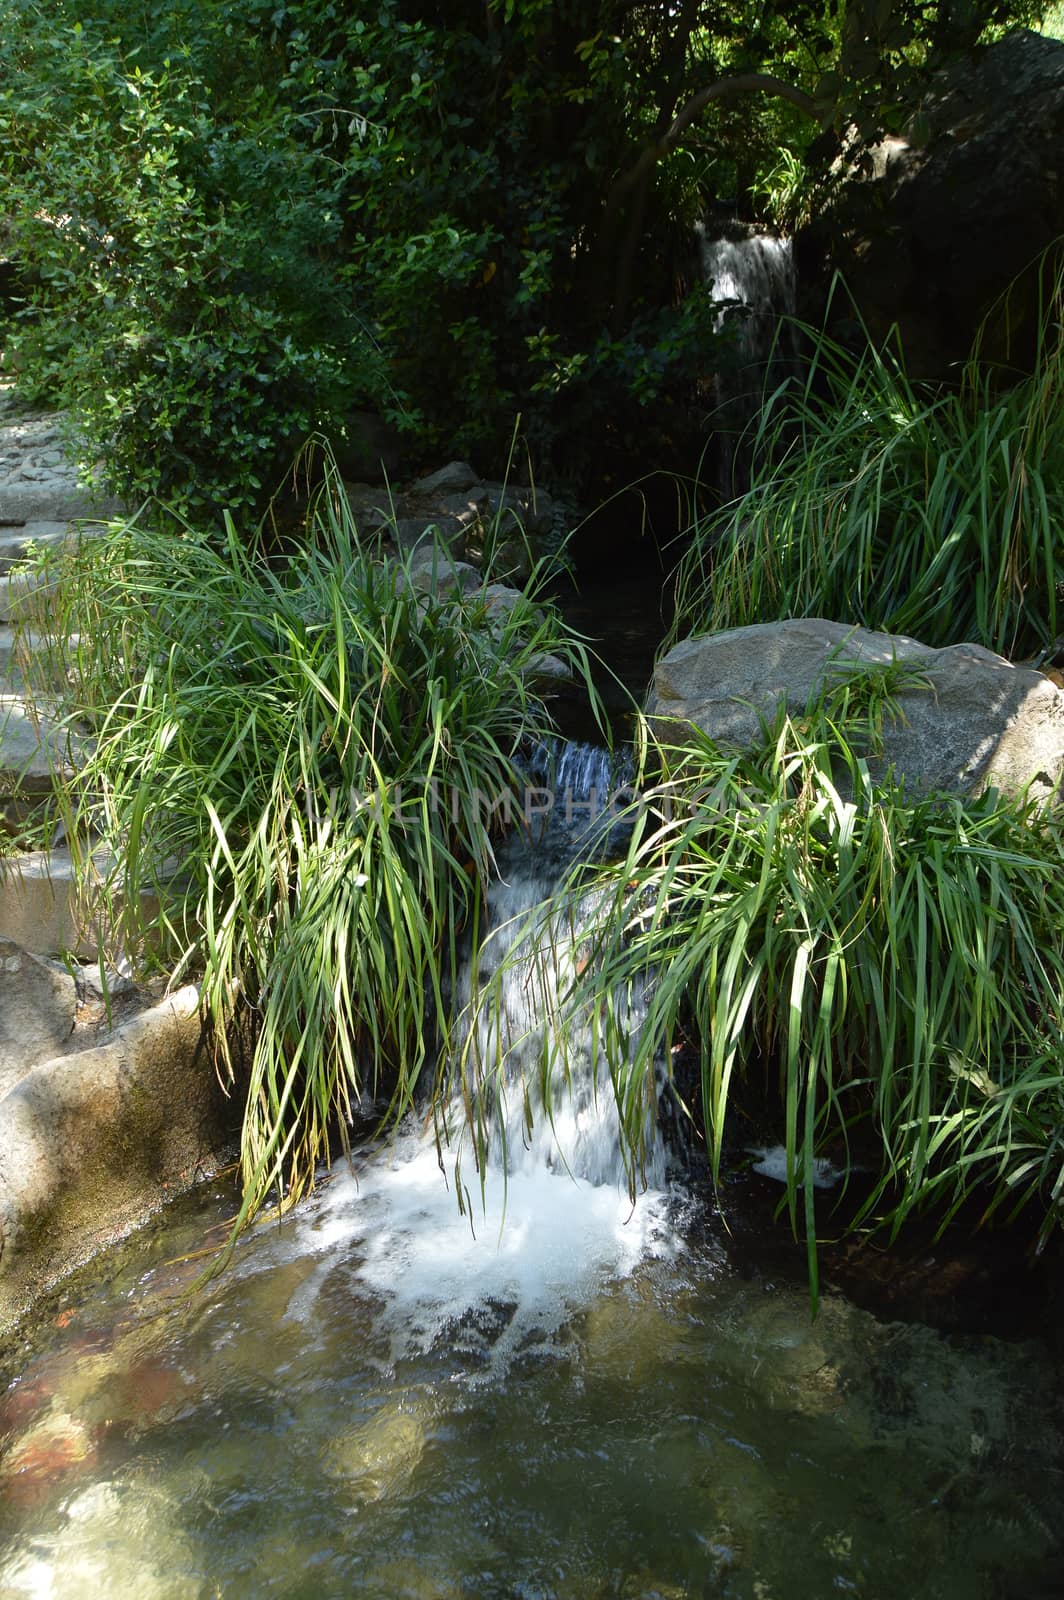 The stream cascades into a pond among green plants, a cozy landscape for relaxation and meditation in the Park.